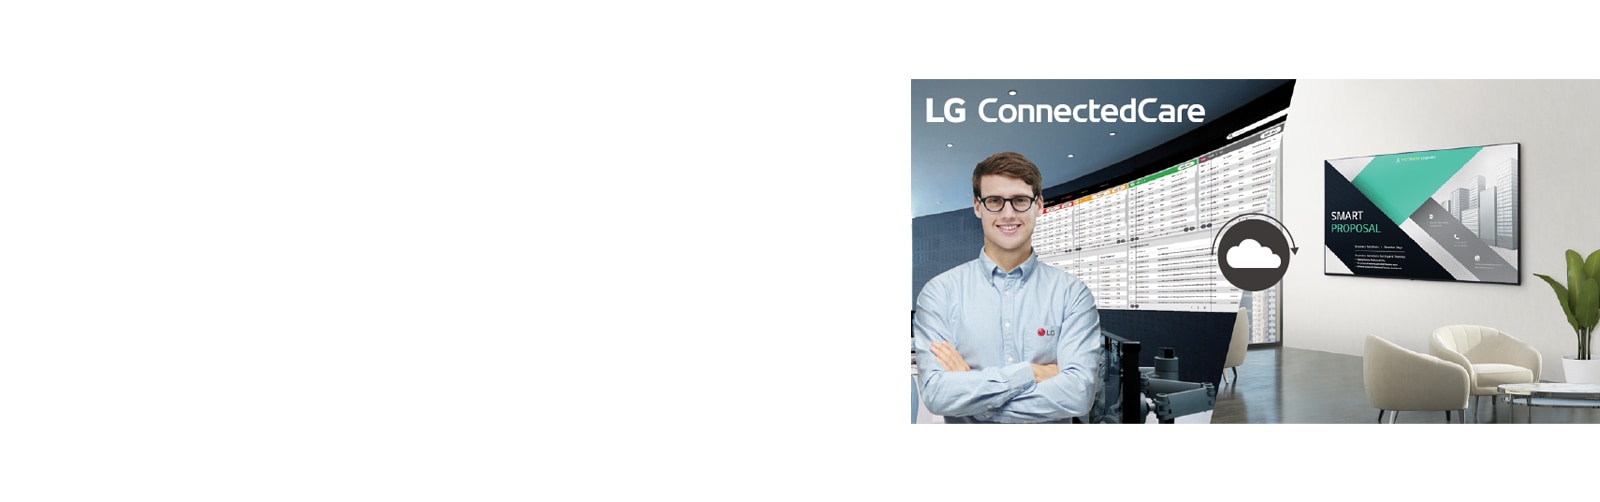 The LG employee is remotely monitoring the UL3J series installed in a different place.